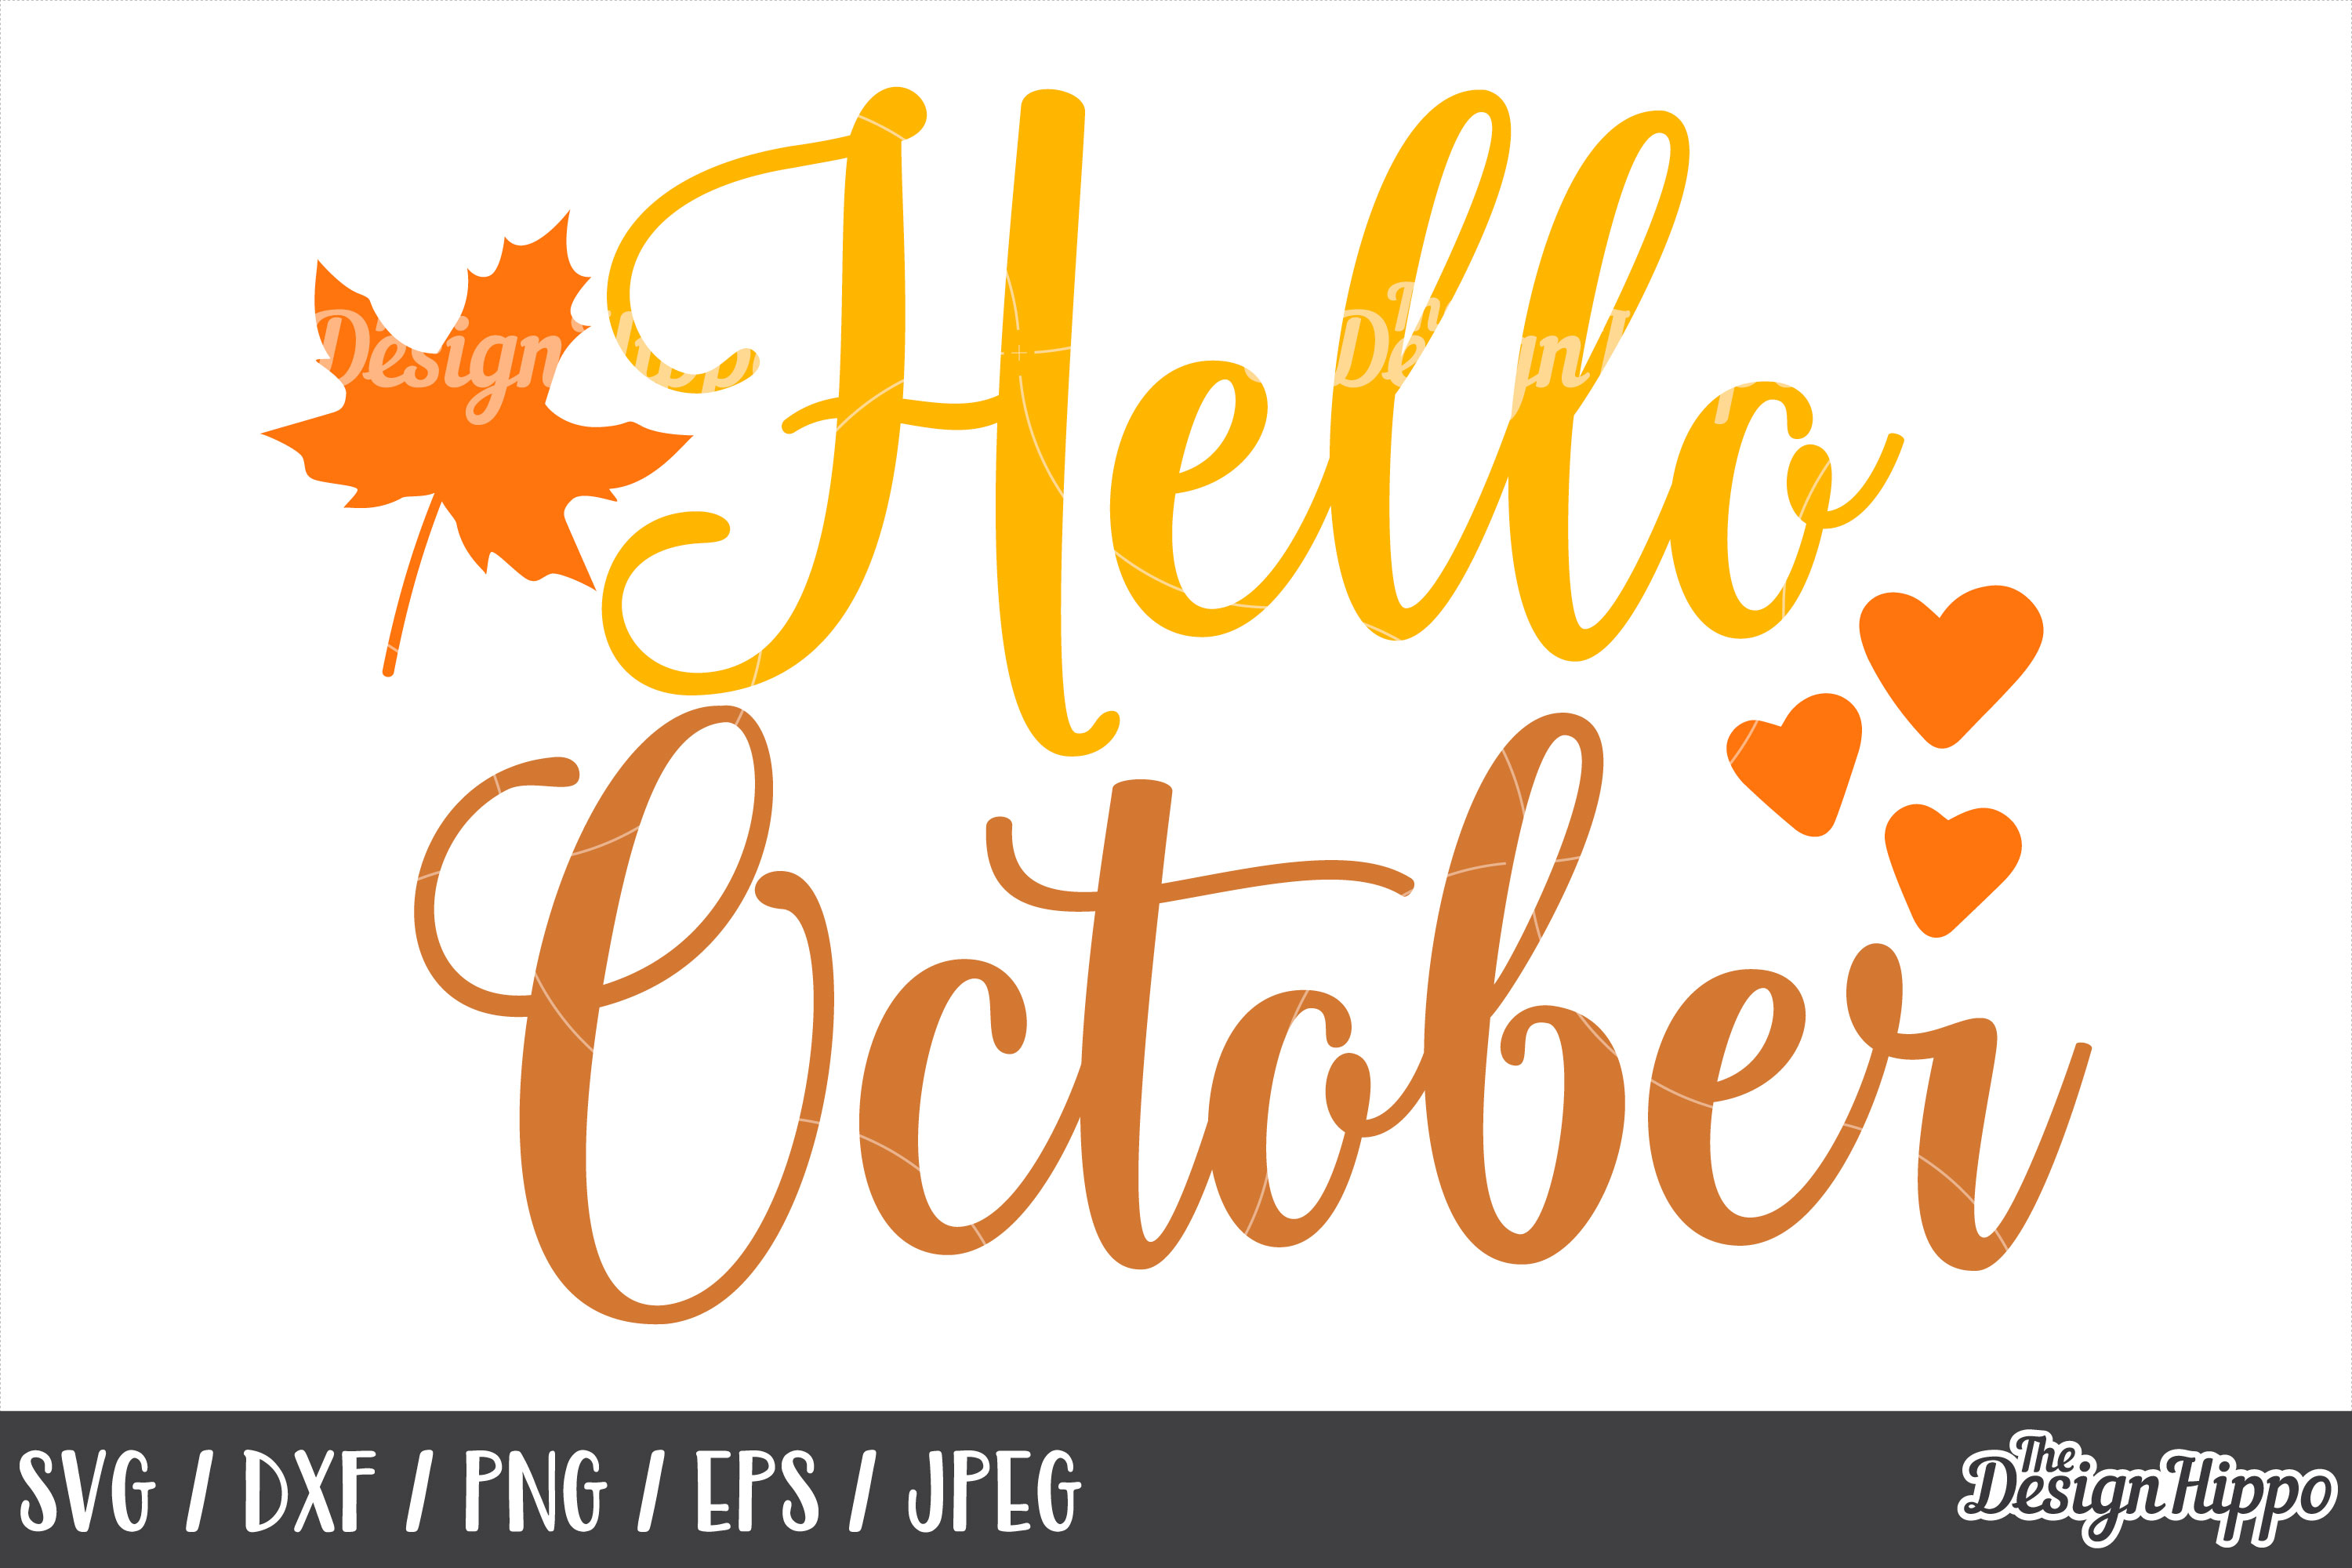 October first. I Love October картинки. Hello October PNG. Hello October ЗТП. Hello Fall полоска.